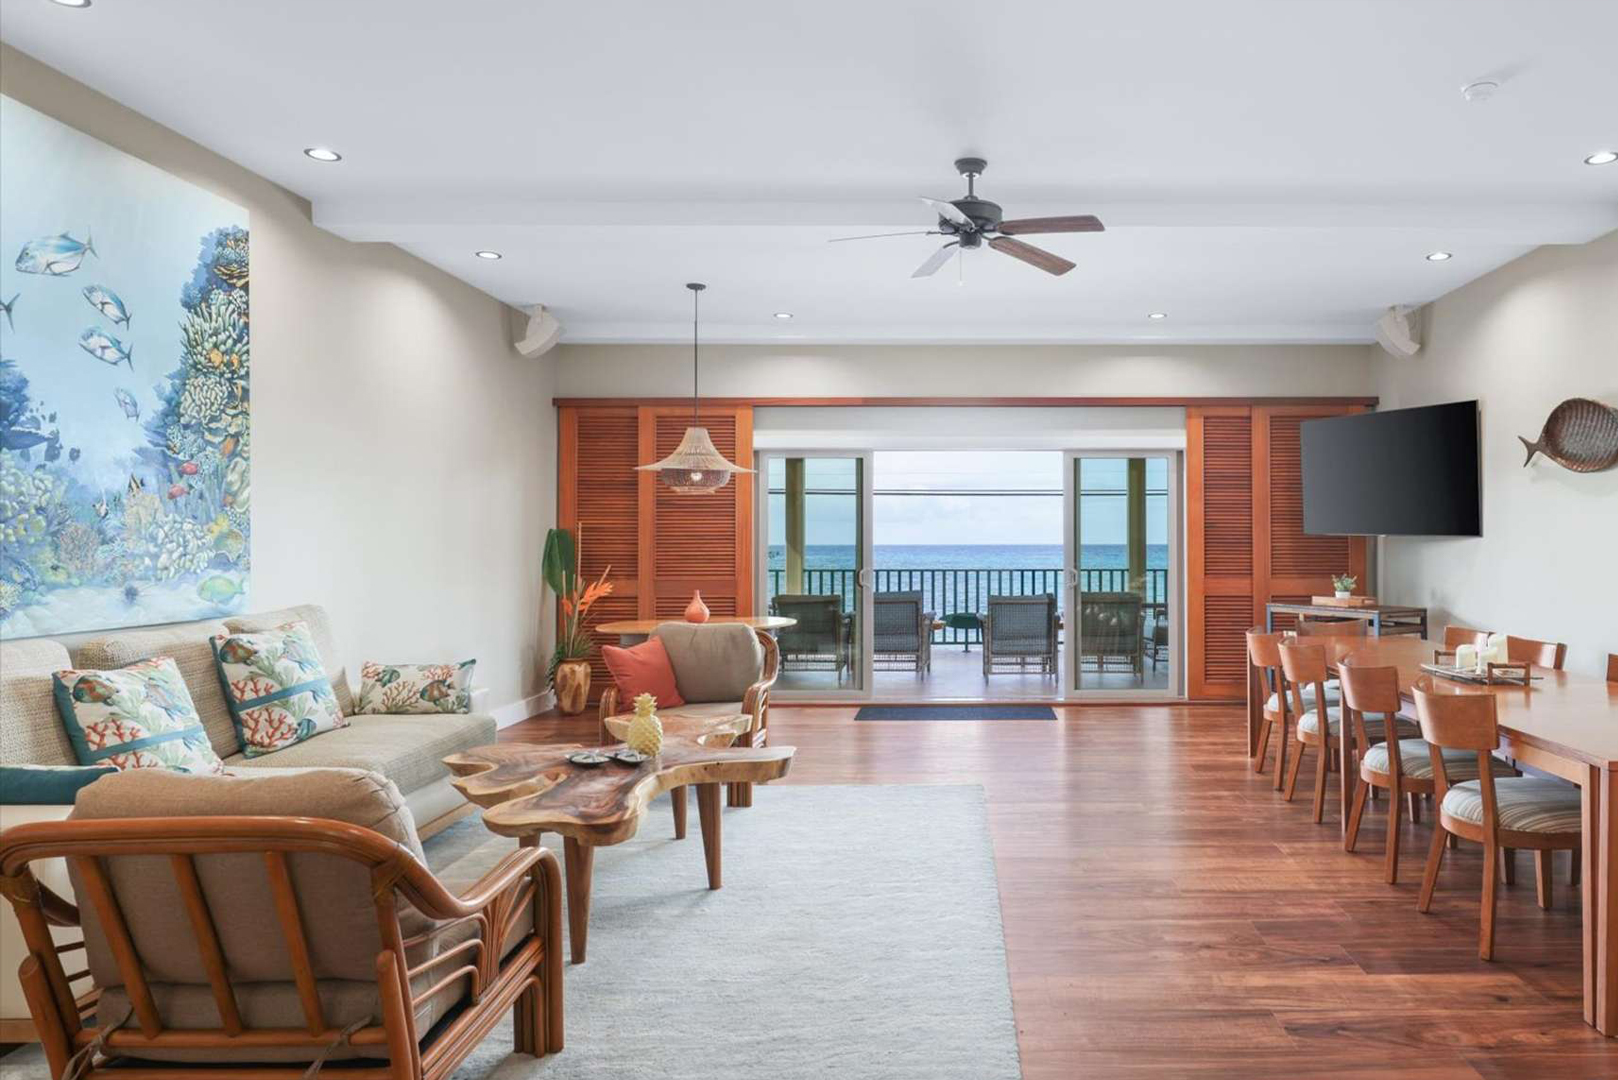 A view of the living area looking towards the ocean